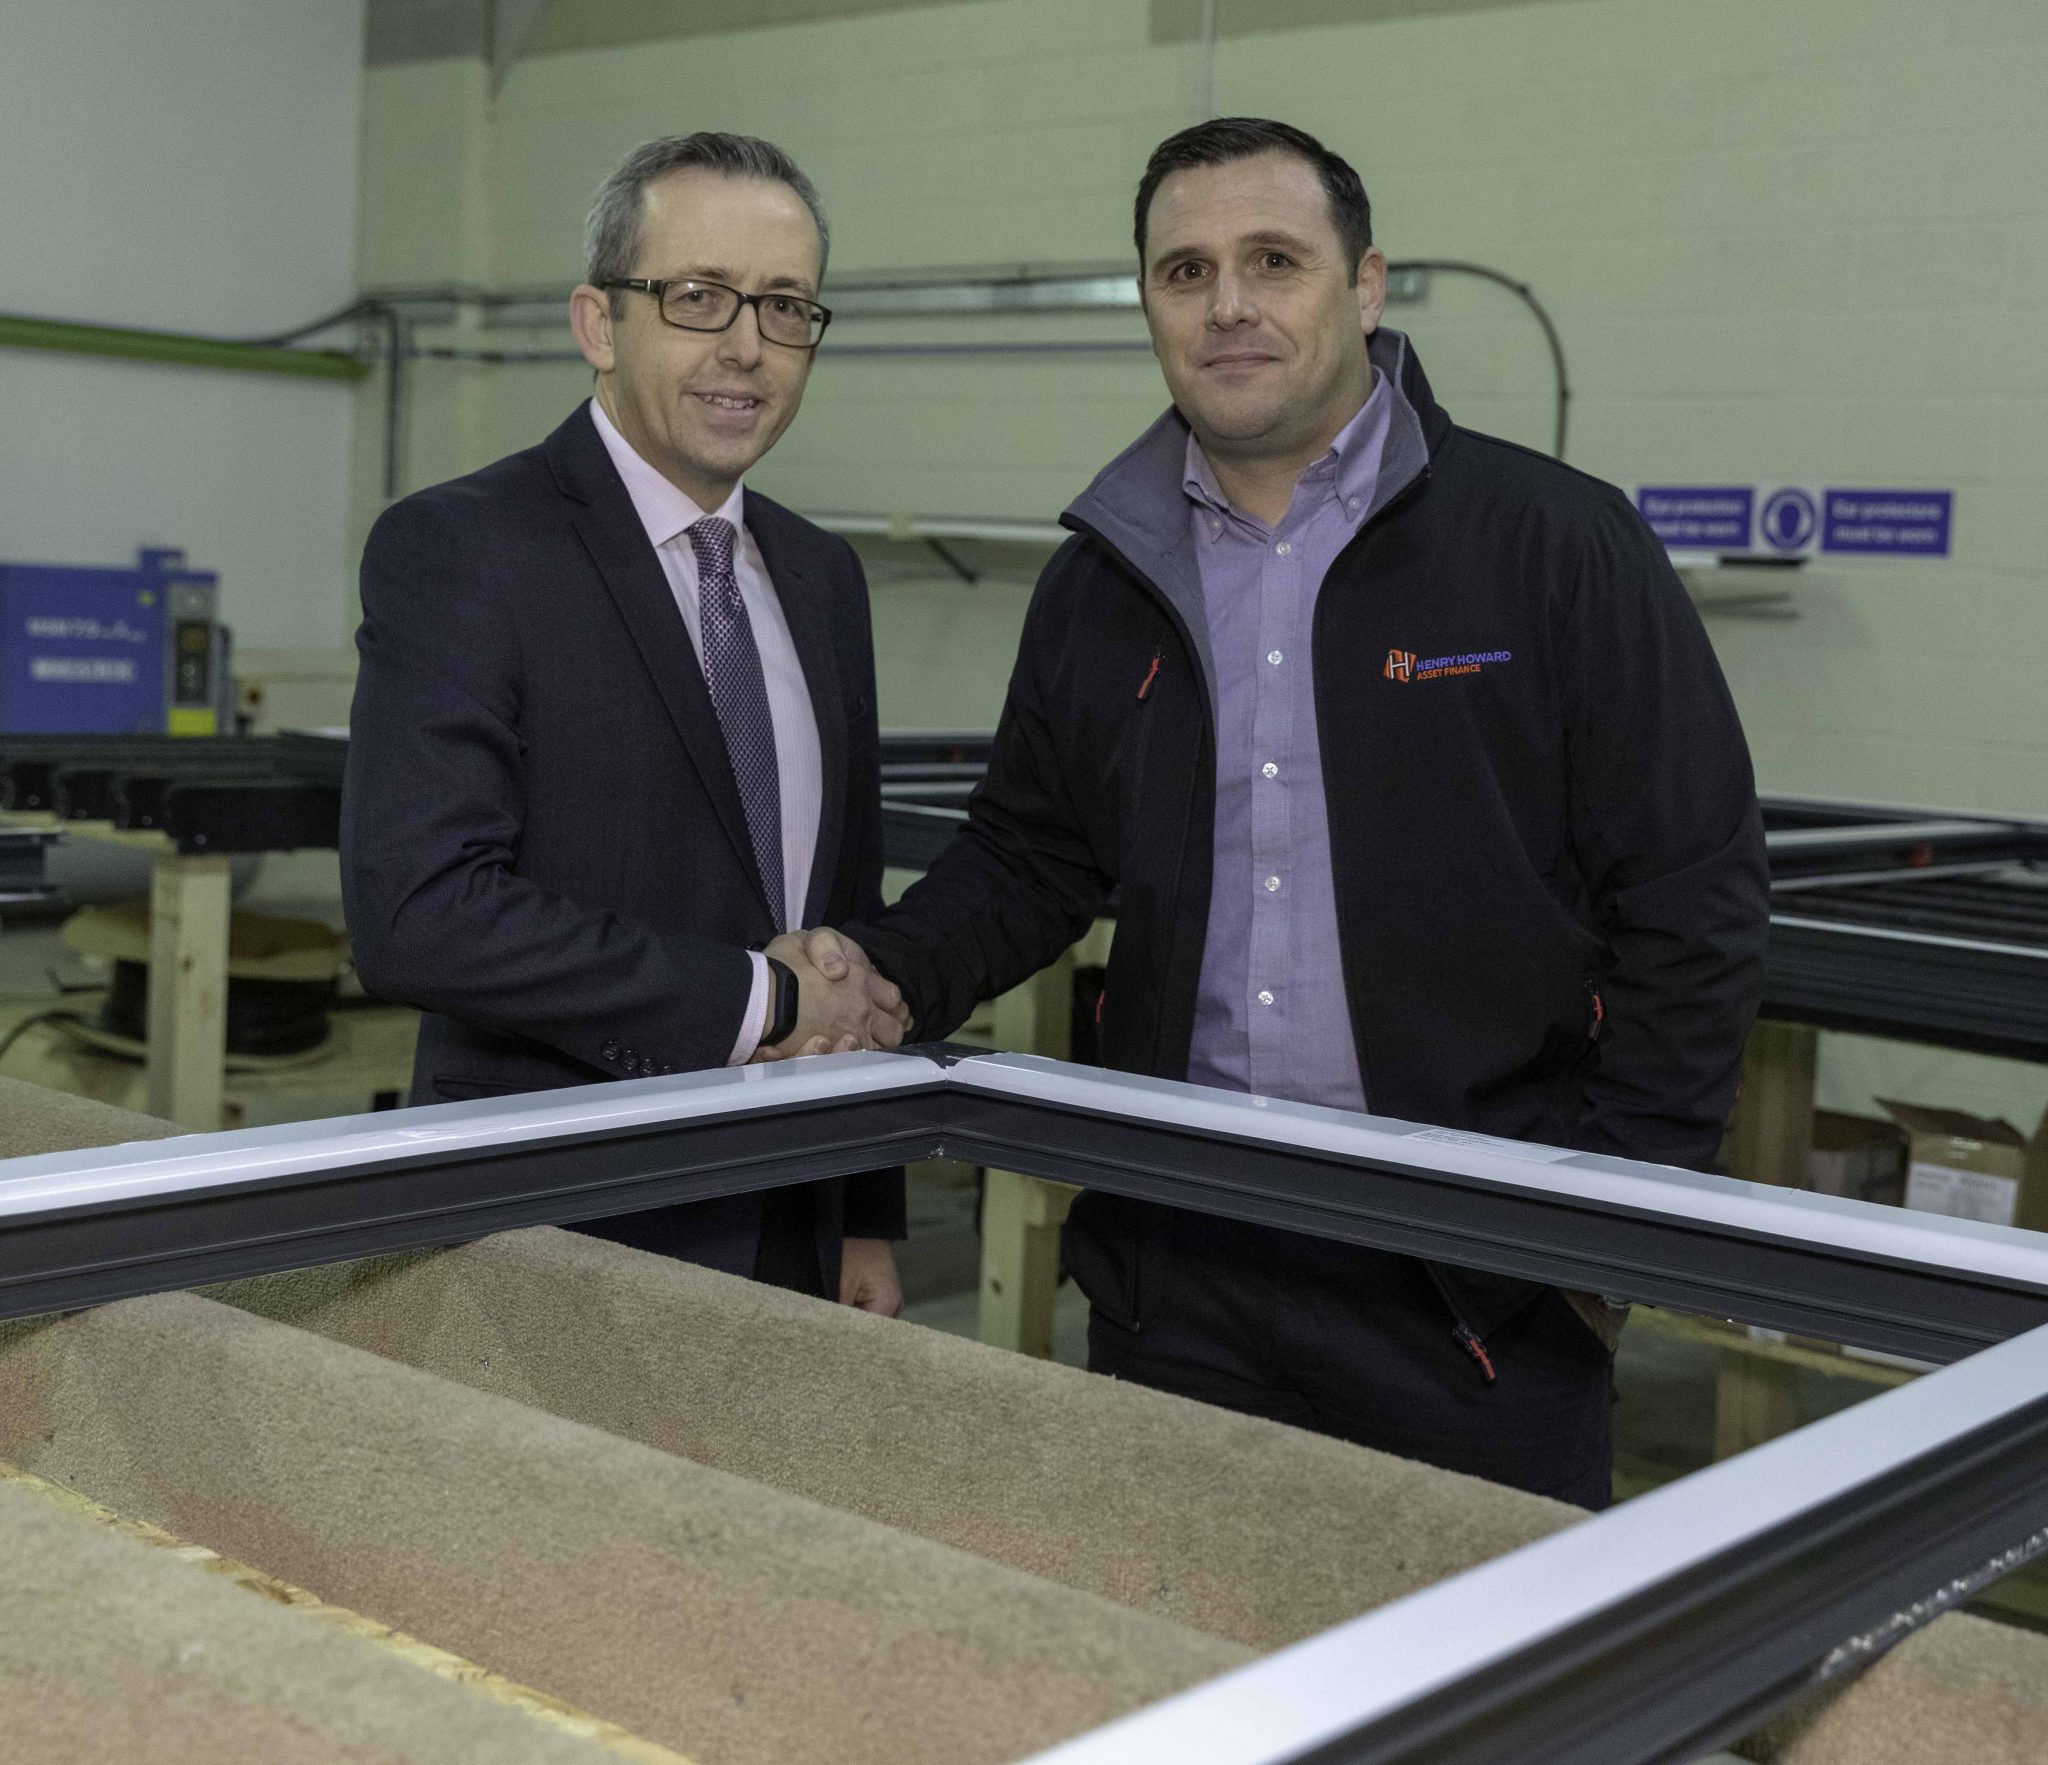 A glass act: Henry Howard Finance supports window manufacturer and provides clear vision for business growth